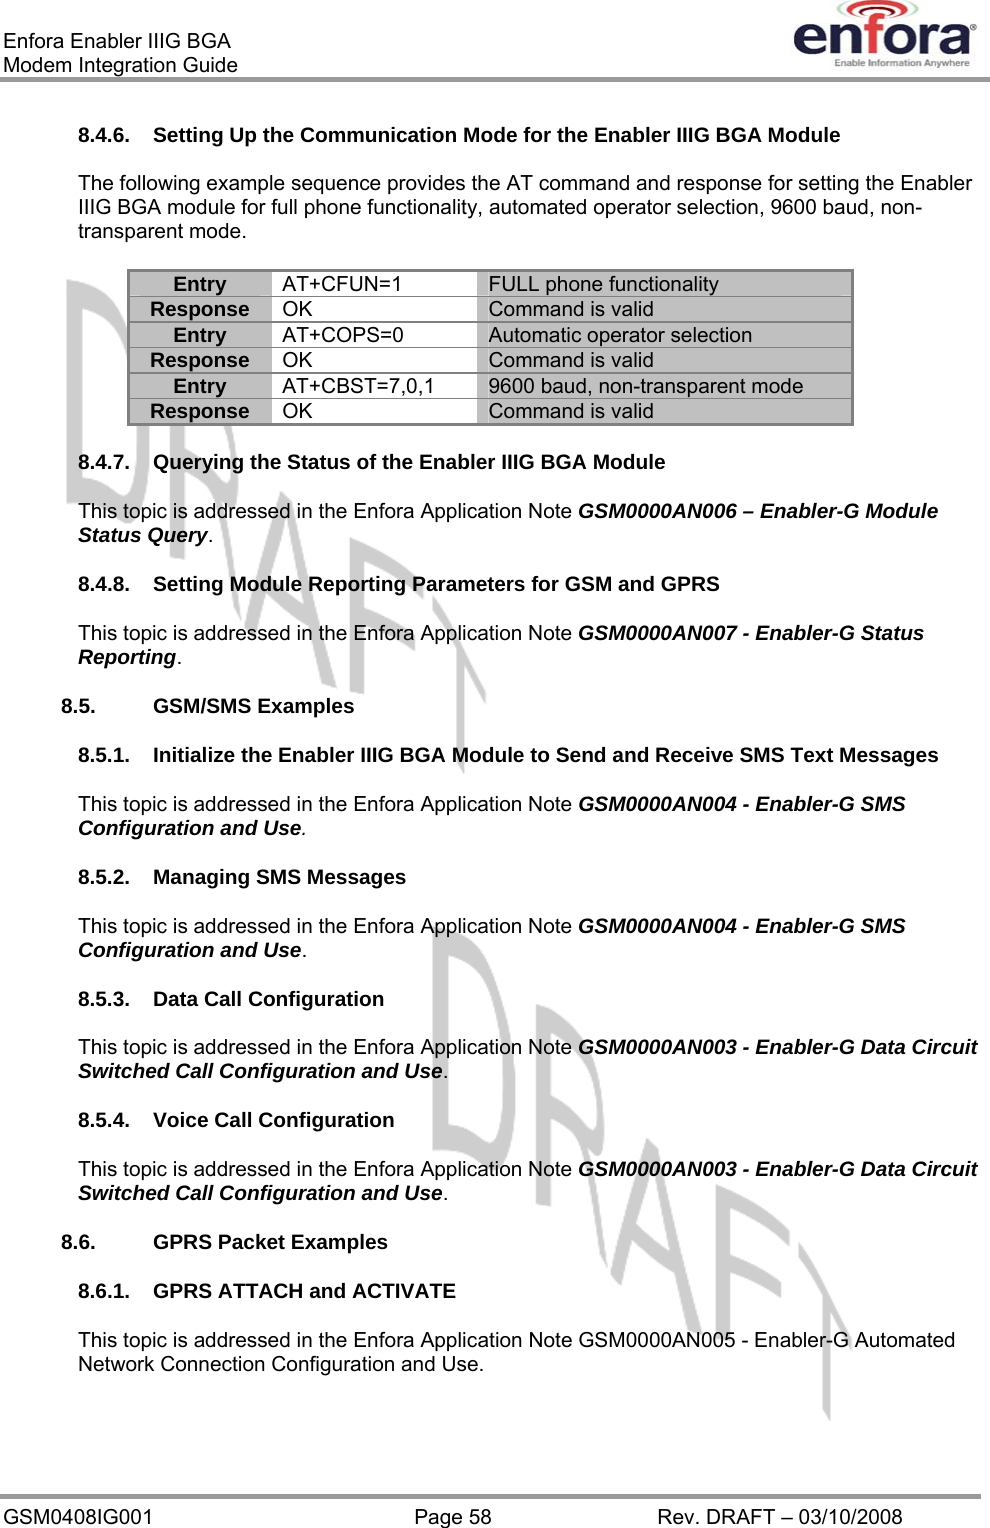 Enfora Enabler IIIG BGA Modem Integration Guide 8.4.6.  Setting Up the Communication Mode for the Enabler IIIG BGA Module The following example sequence provides the AT command and response for setting the Enabler IIIG BGA module for full phone functionality, automated operator selection, 9600 baud, non-transparent mode. AT+CFUN=1 Entry FULL phone functionality OK Response  Command is valid AT+COPS=0 Entry Automatic operator selection OK Response  Command is valid AT+CBST=7,0,1 Entry 9600 baud, non-transparent mode OK Response  Command is valid  8.4.7.  Querying the Status of the Enabler IIIG BGA Module This topic is addressed in the Enfora Application Note GSM0000AN006 – Enabler-G Module Status Query. 8.4.8.  Setting Module Reporting Parameters for GSM and GPRS This topic is addressed in the Enfora Application Note GSM0000AN007 - Enabler-G Status Reporting. 8.5. GSM/SMS Examples 8.5.1.  Initialize the Enabler IIIG BGA Module to Send and Receive SMS Text Messages This topic is addressed in the Enfora Application Note GSM0000AN004 - Enabler-G SMS Configuration and Use. 8.5.2.  Managing SMS Messages This topic is addressed in the Enfora Application Note GSM0000AN004 - Enabler-G SMS Configuration and Use. 8.5.3.  Data Call Configuration This topic is addressed in the Enfora Application Note GSM0000AN003 - Enabler-G Data Circuit Switched Call Configuration and Use. 8.5.4.  Voice Call Configuration This topic is addressed in the Enfora Application Note GSM0000AN003 - Enabler-G Data Circuit Switched Call Configuration and Use. 8.6.  GPRS Packet Examples 8.6.1.  GPRS ATTACH and ACTIVATE This topic is addressed in the Enfora Application Note GSM0000AN005 - Enabler-G Automated Network Connection Configuration and Use. GSM0408IG001  Page 58  Rev. DRAFT – 03/10/2008 